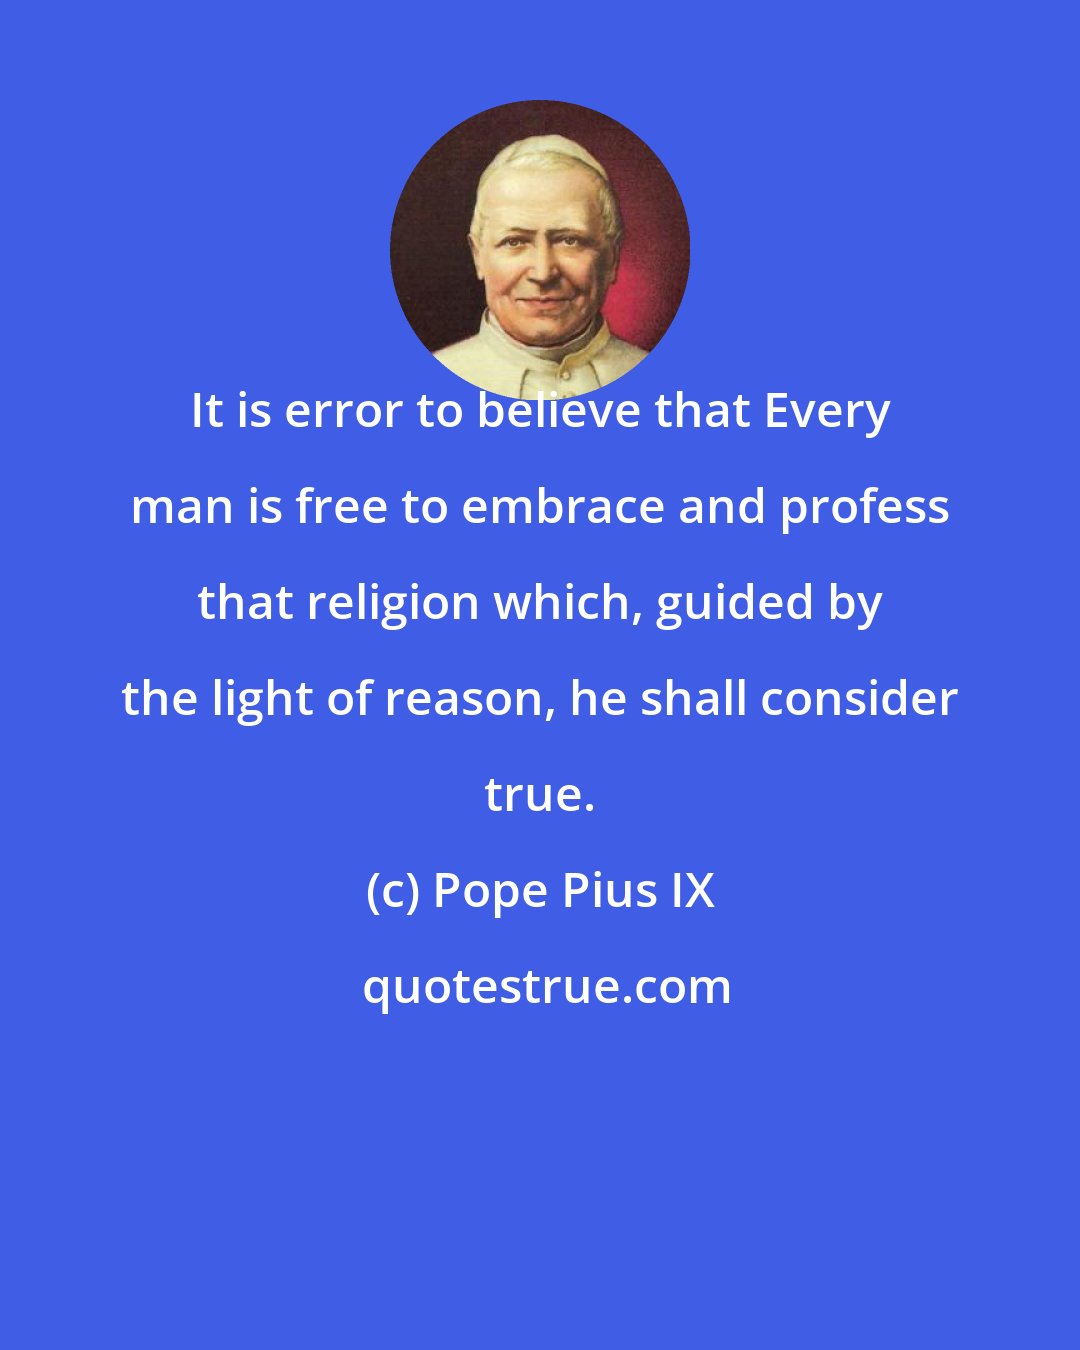 Pope Pius IX: It is error to believe that Every man is free to embrace and profess that religion which, guided by the light of reason, he shall consider true.